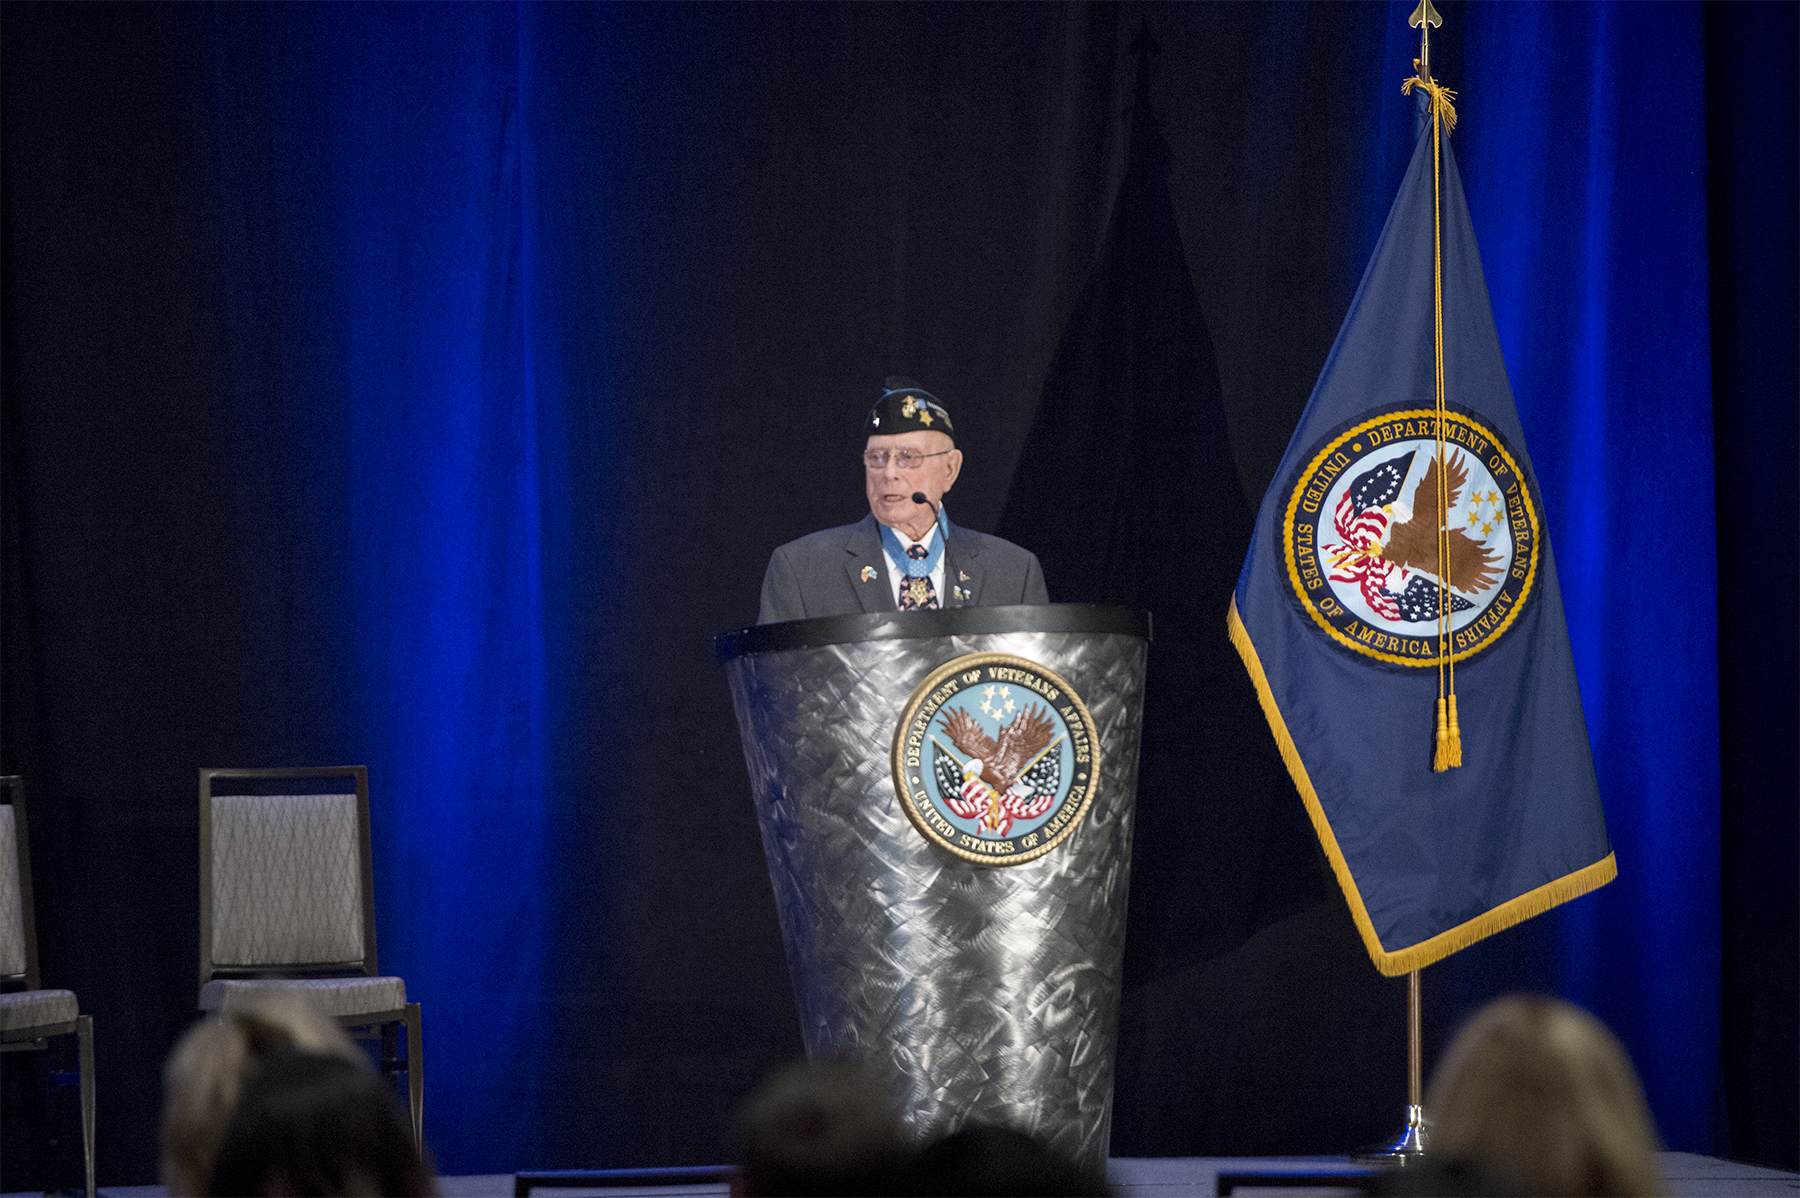 Herschel "Woody" Williams, Medal of Honor Recipient addresses crowd at the VA PX Symposium.